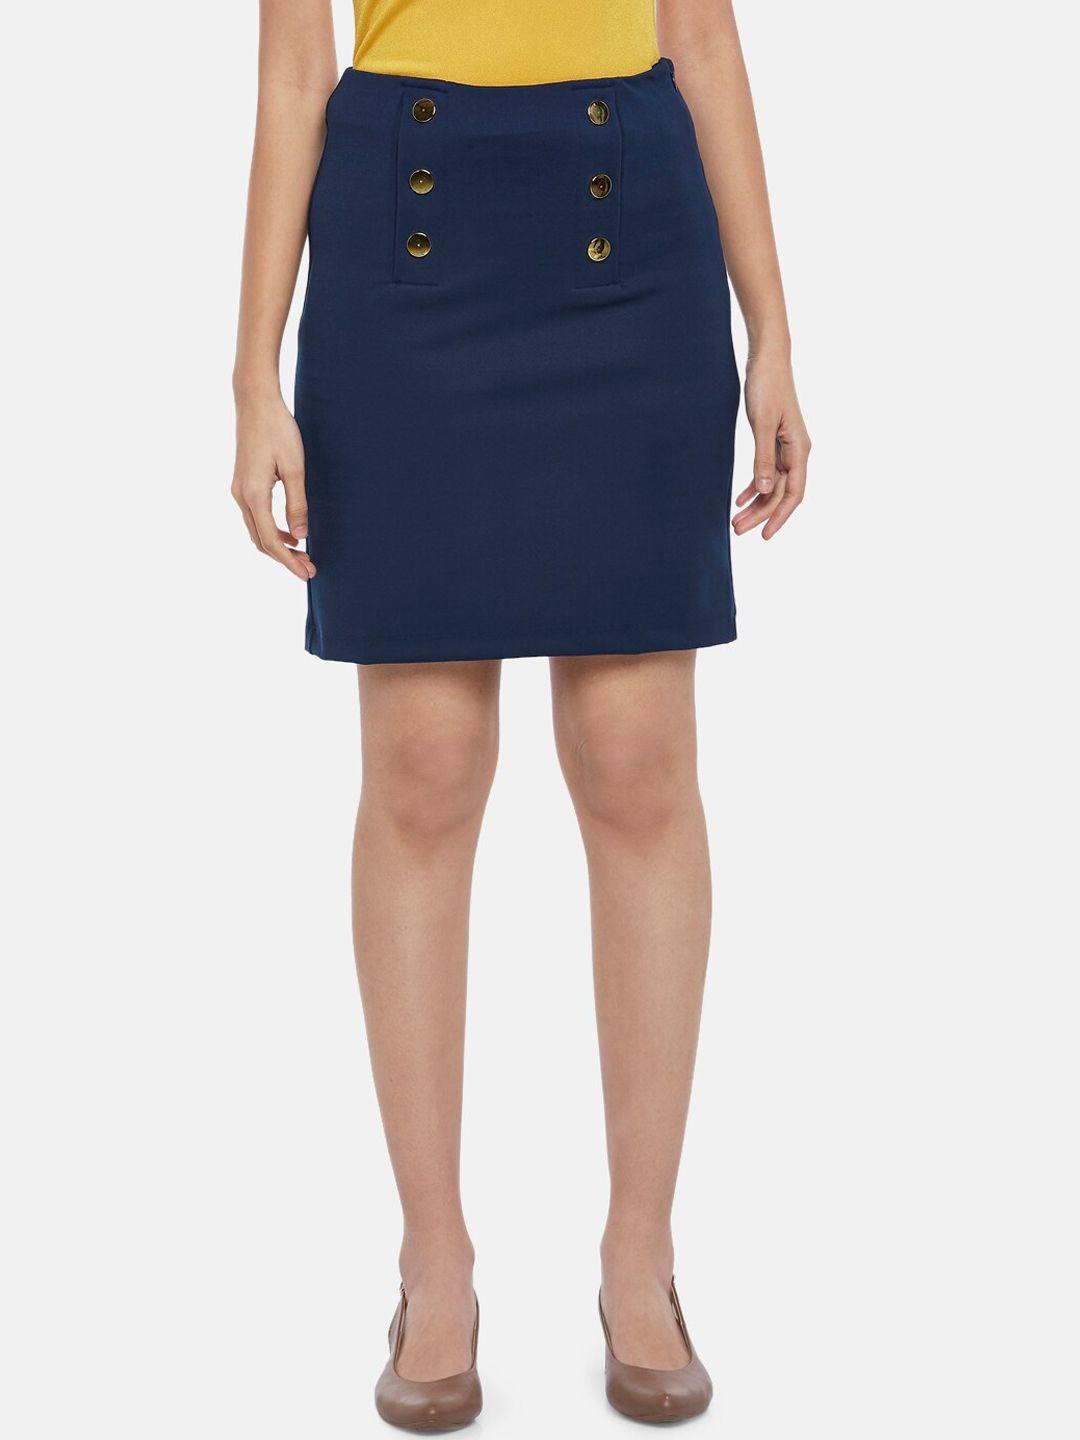 annabelle by pantaloons women navy blue solid pencil skirt